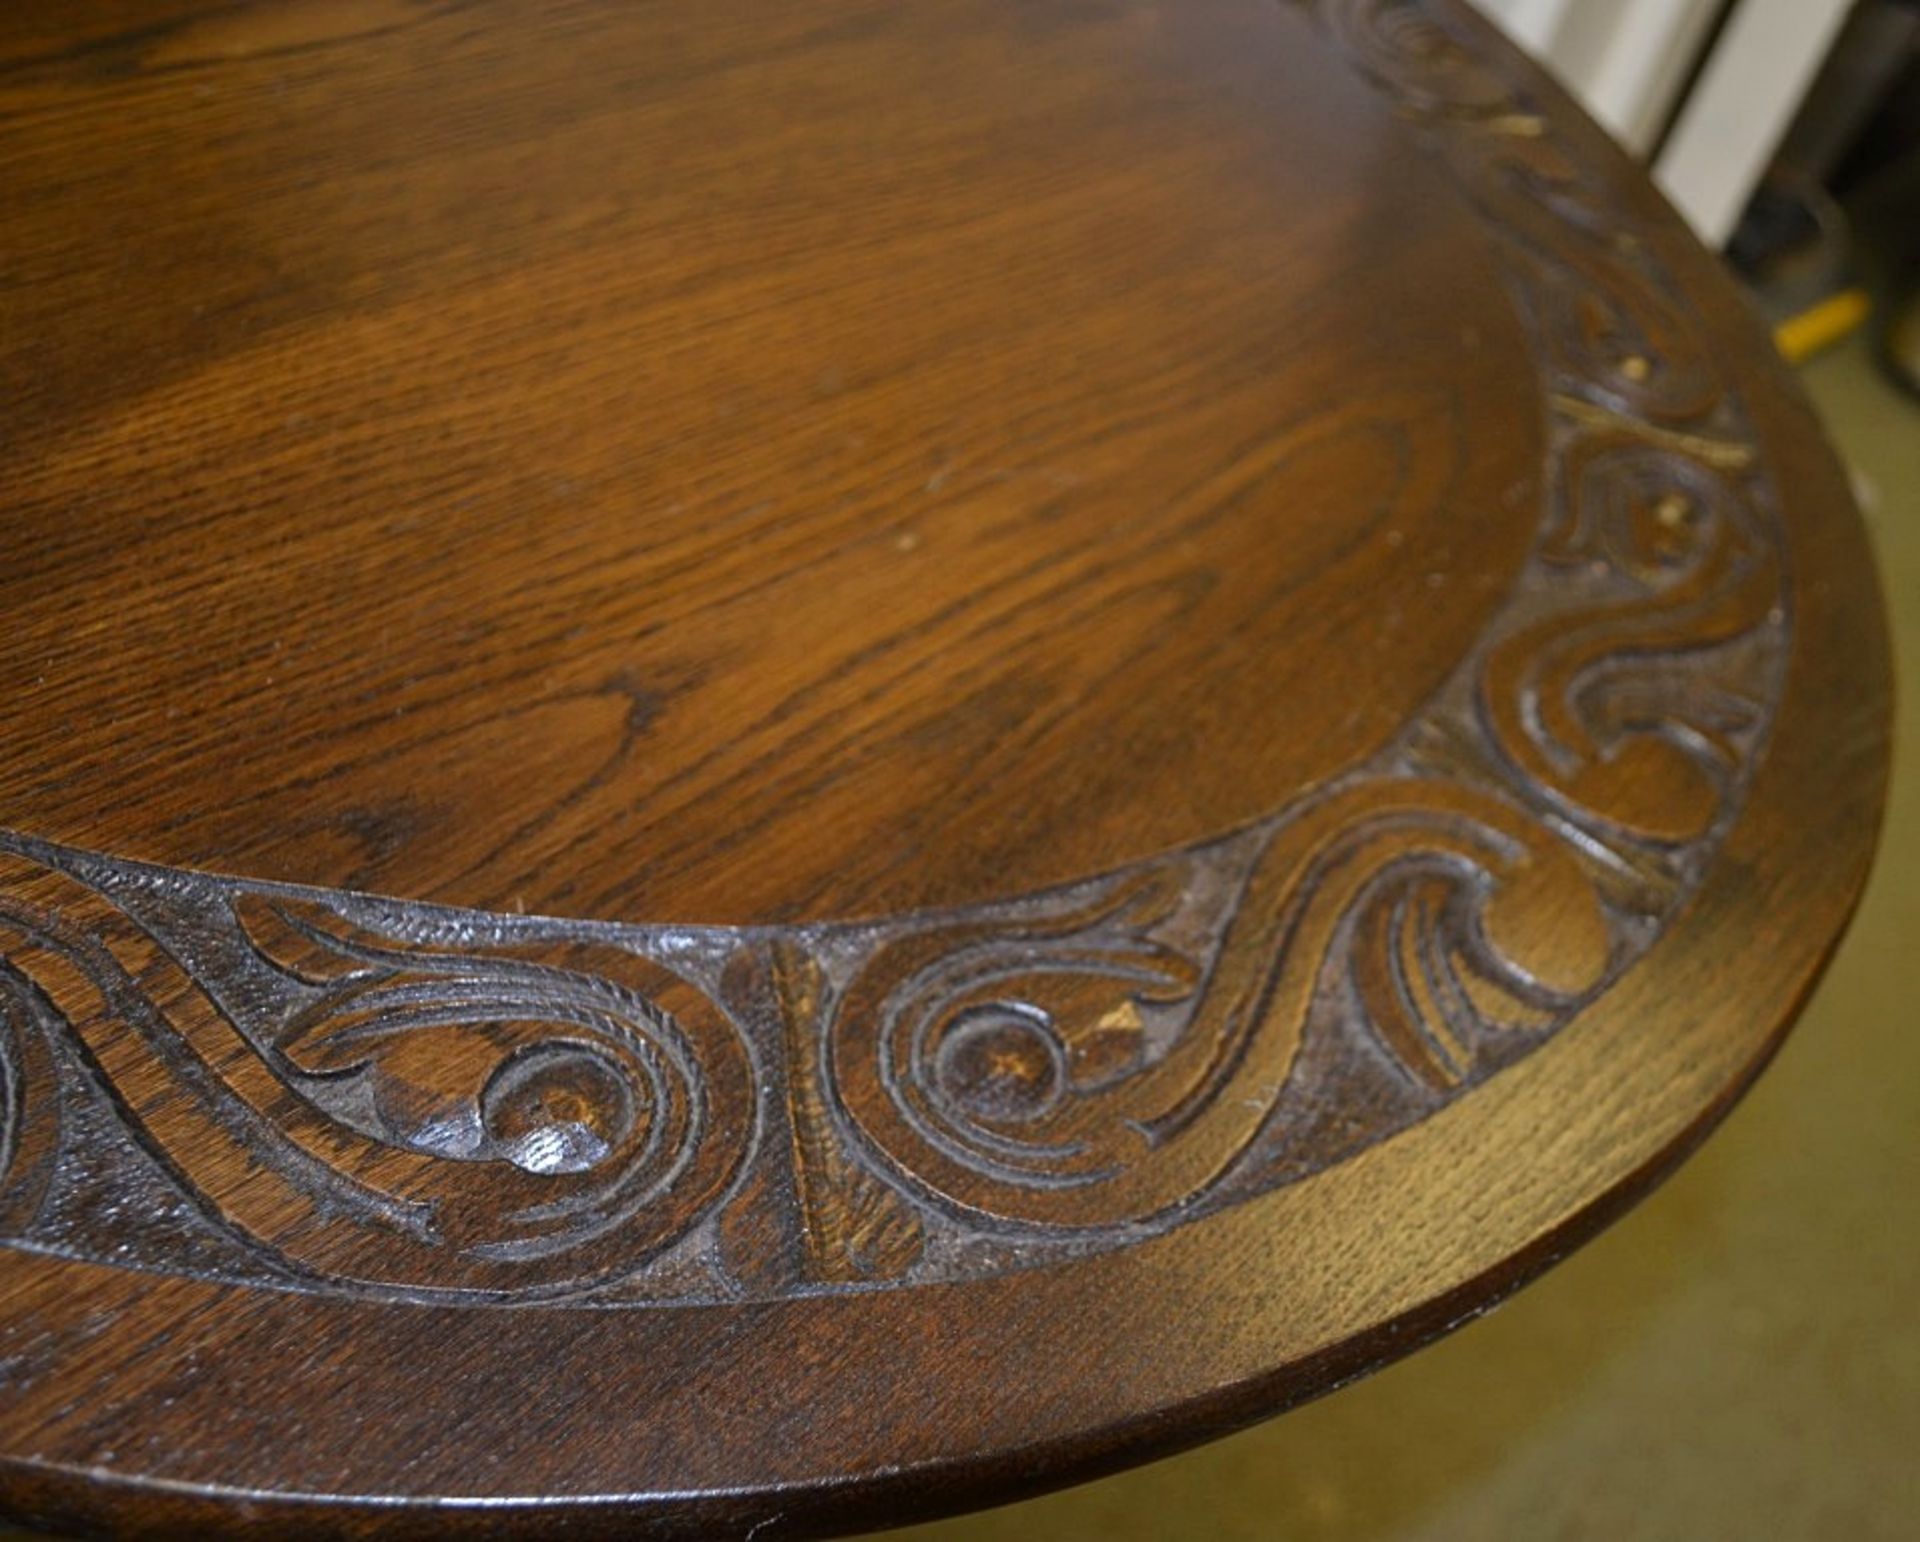 1 x Vintage Drop Leaf Solid Wood Table With Carved Floral Decoration - From A Grade II Listed Hall - Image 7 of 9